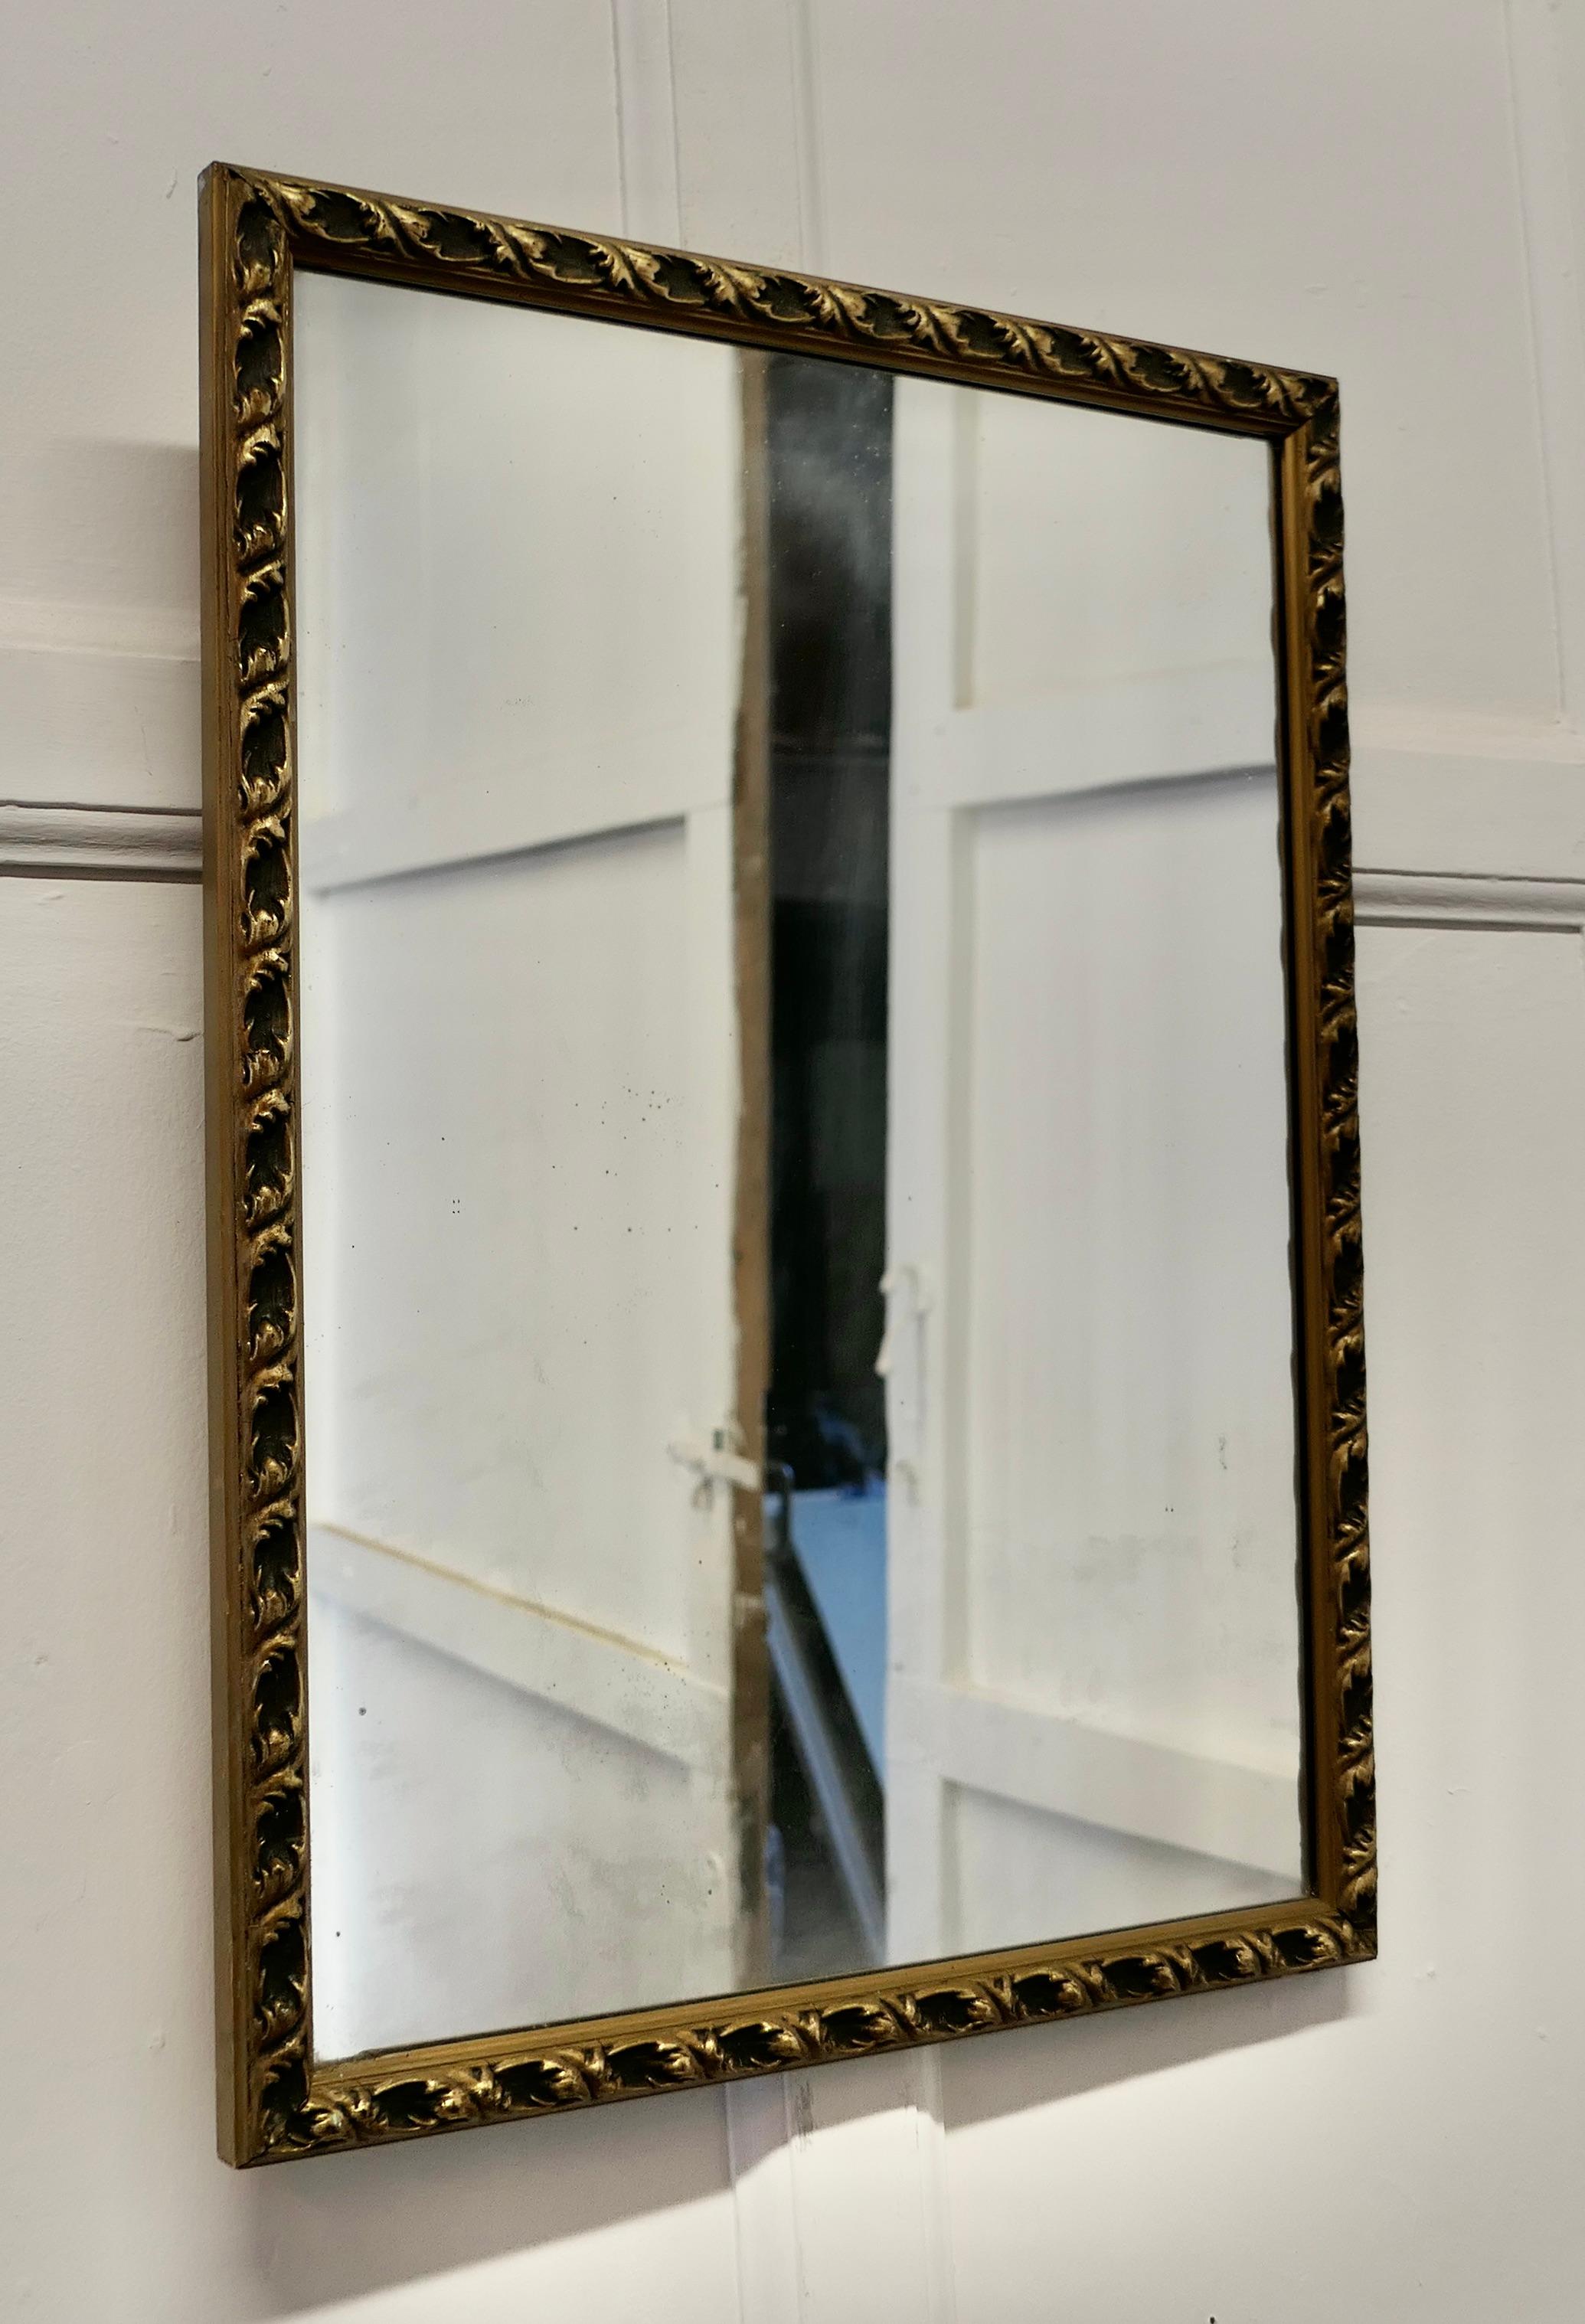 Gilt wall mirror

The Old Gold frame is 1” wide with age darkened gilt frame the looking glass is in good condition
 The mirror and carved frame are in good aged condition 
The Mirror is 24” high, 18” wide 
JK60.